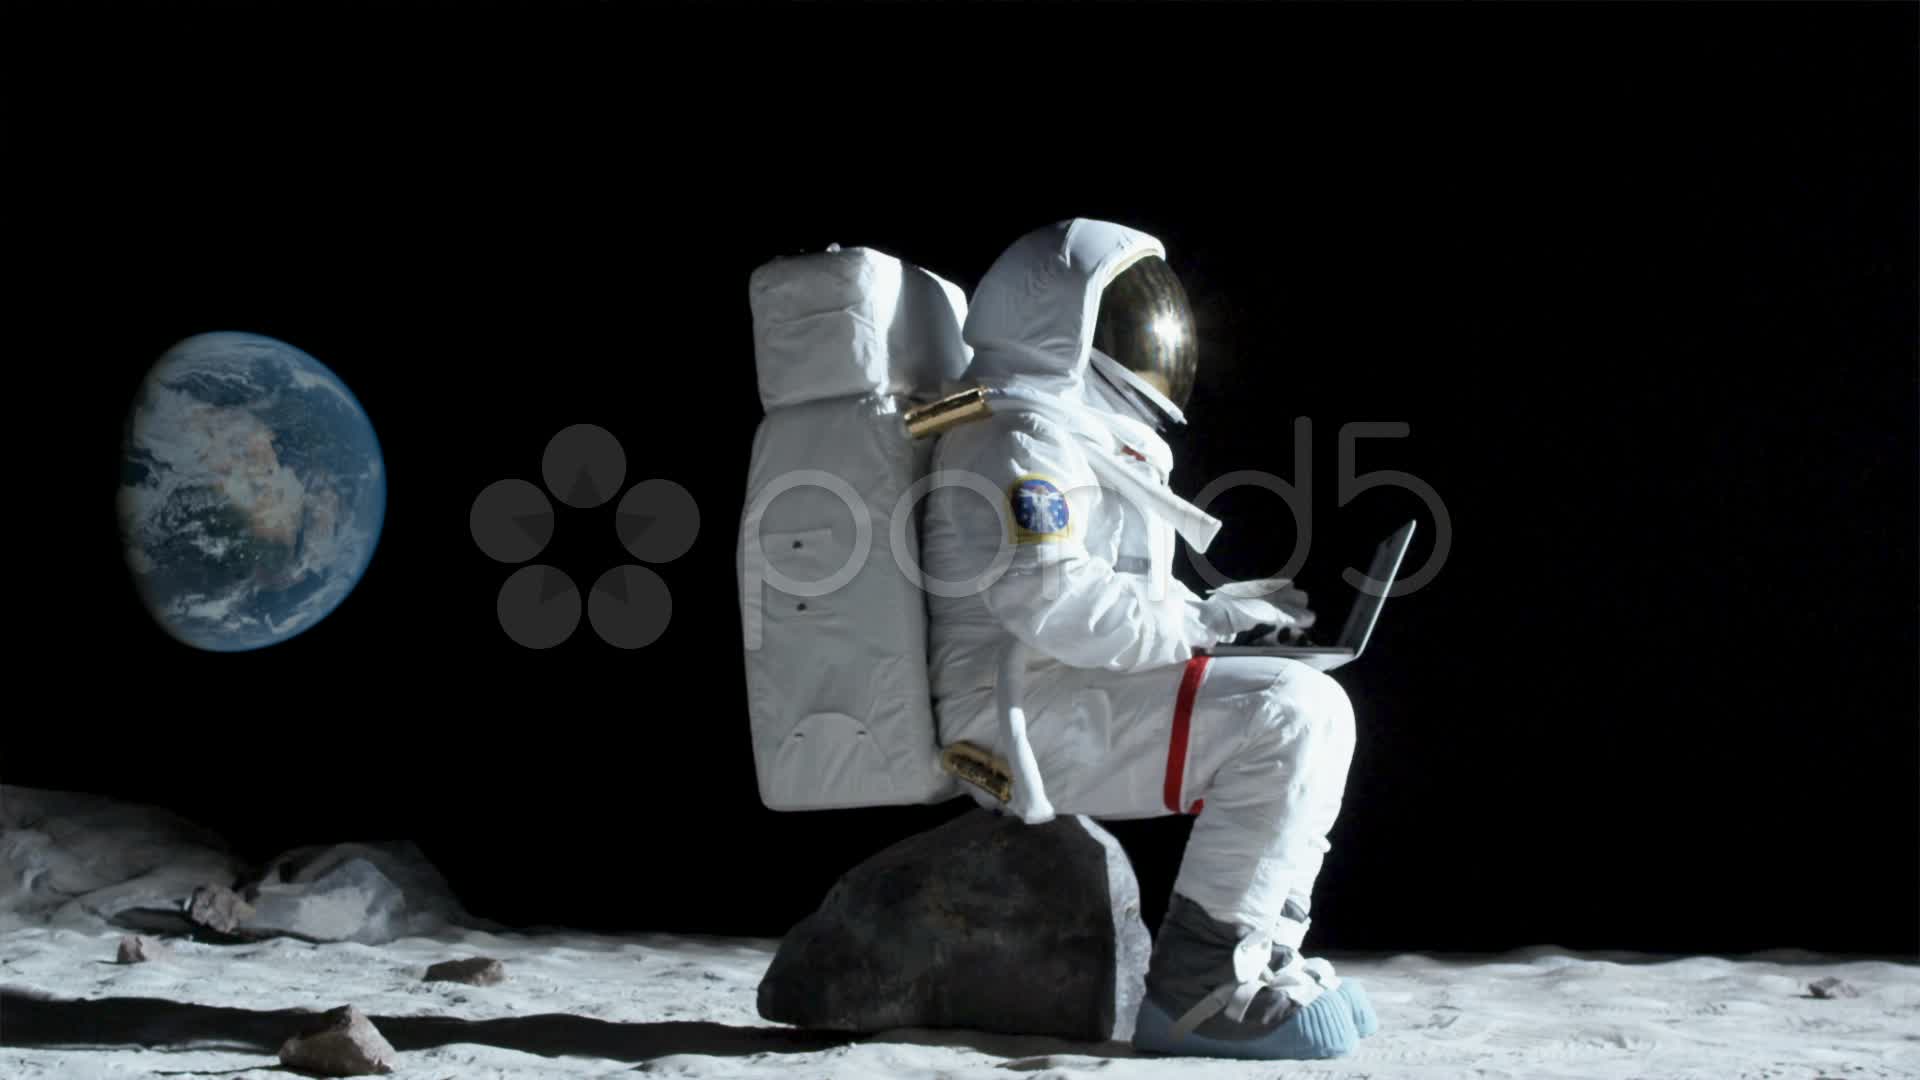 SLO MO, WS, Lockdown of an astronaut sitting on a rock on the moon ...